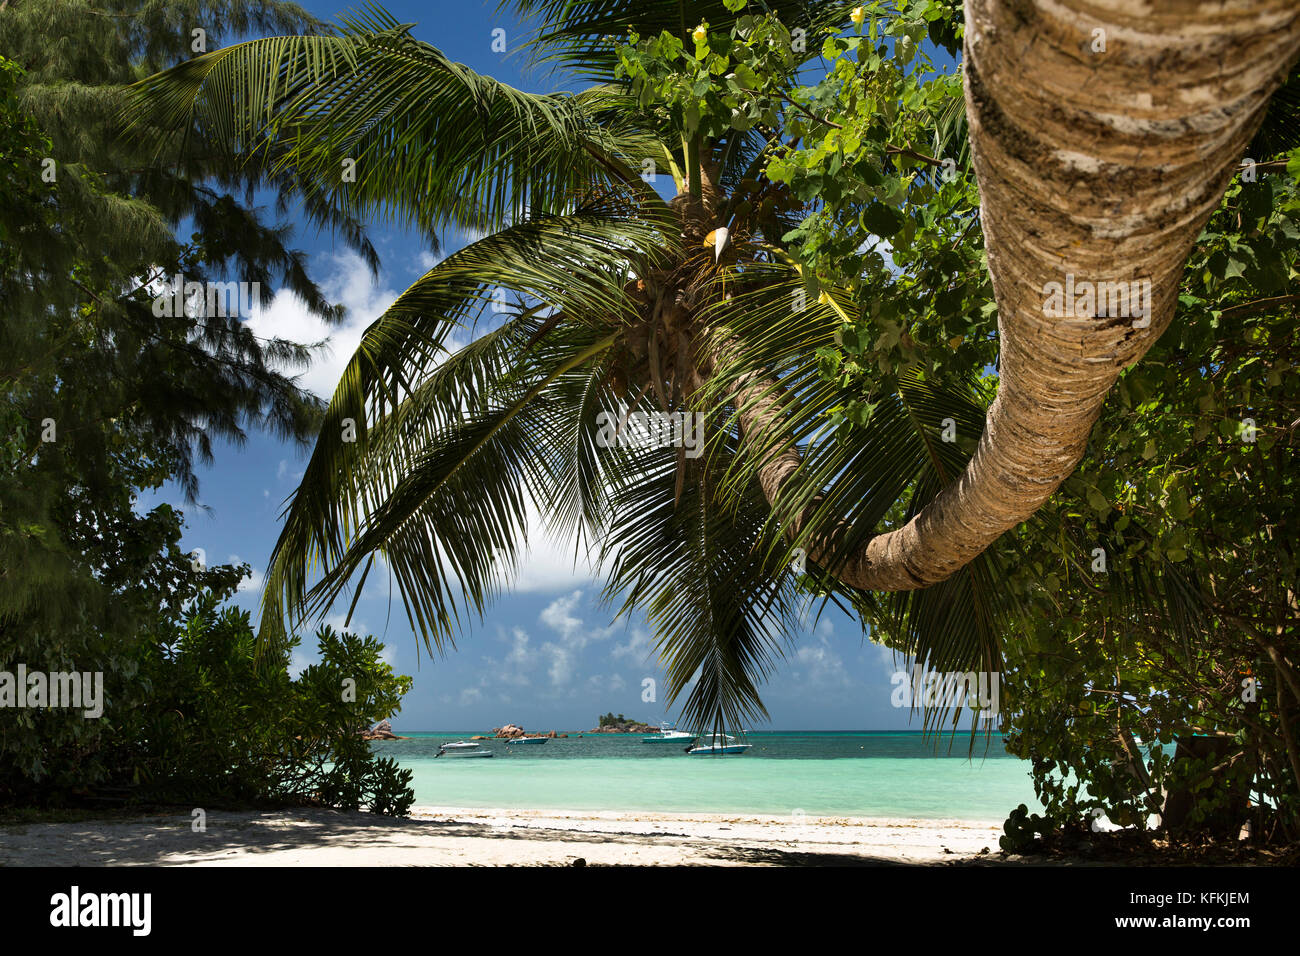 The Seychelles, Praslin, Anse Volbert, Cote d’Or beach, palm tree curving over sand Stock Photo